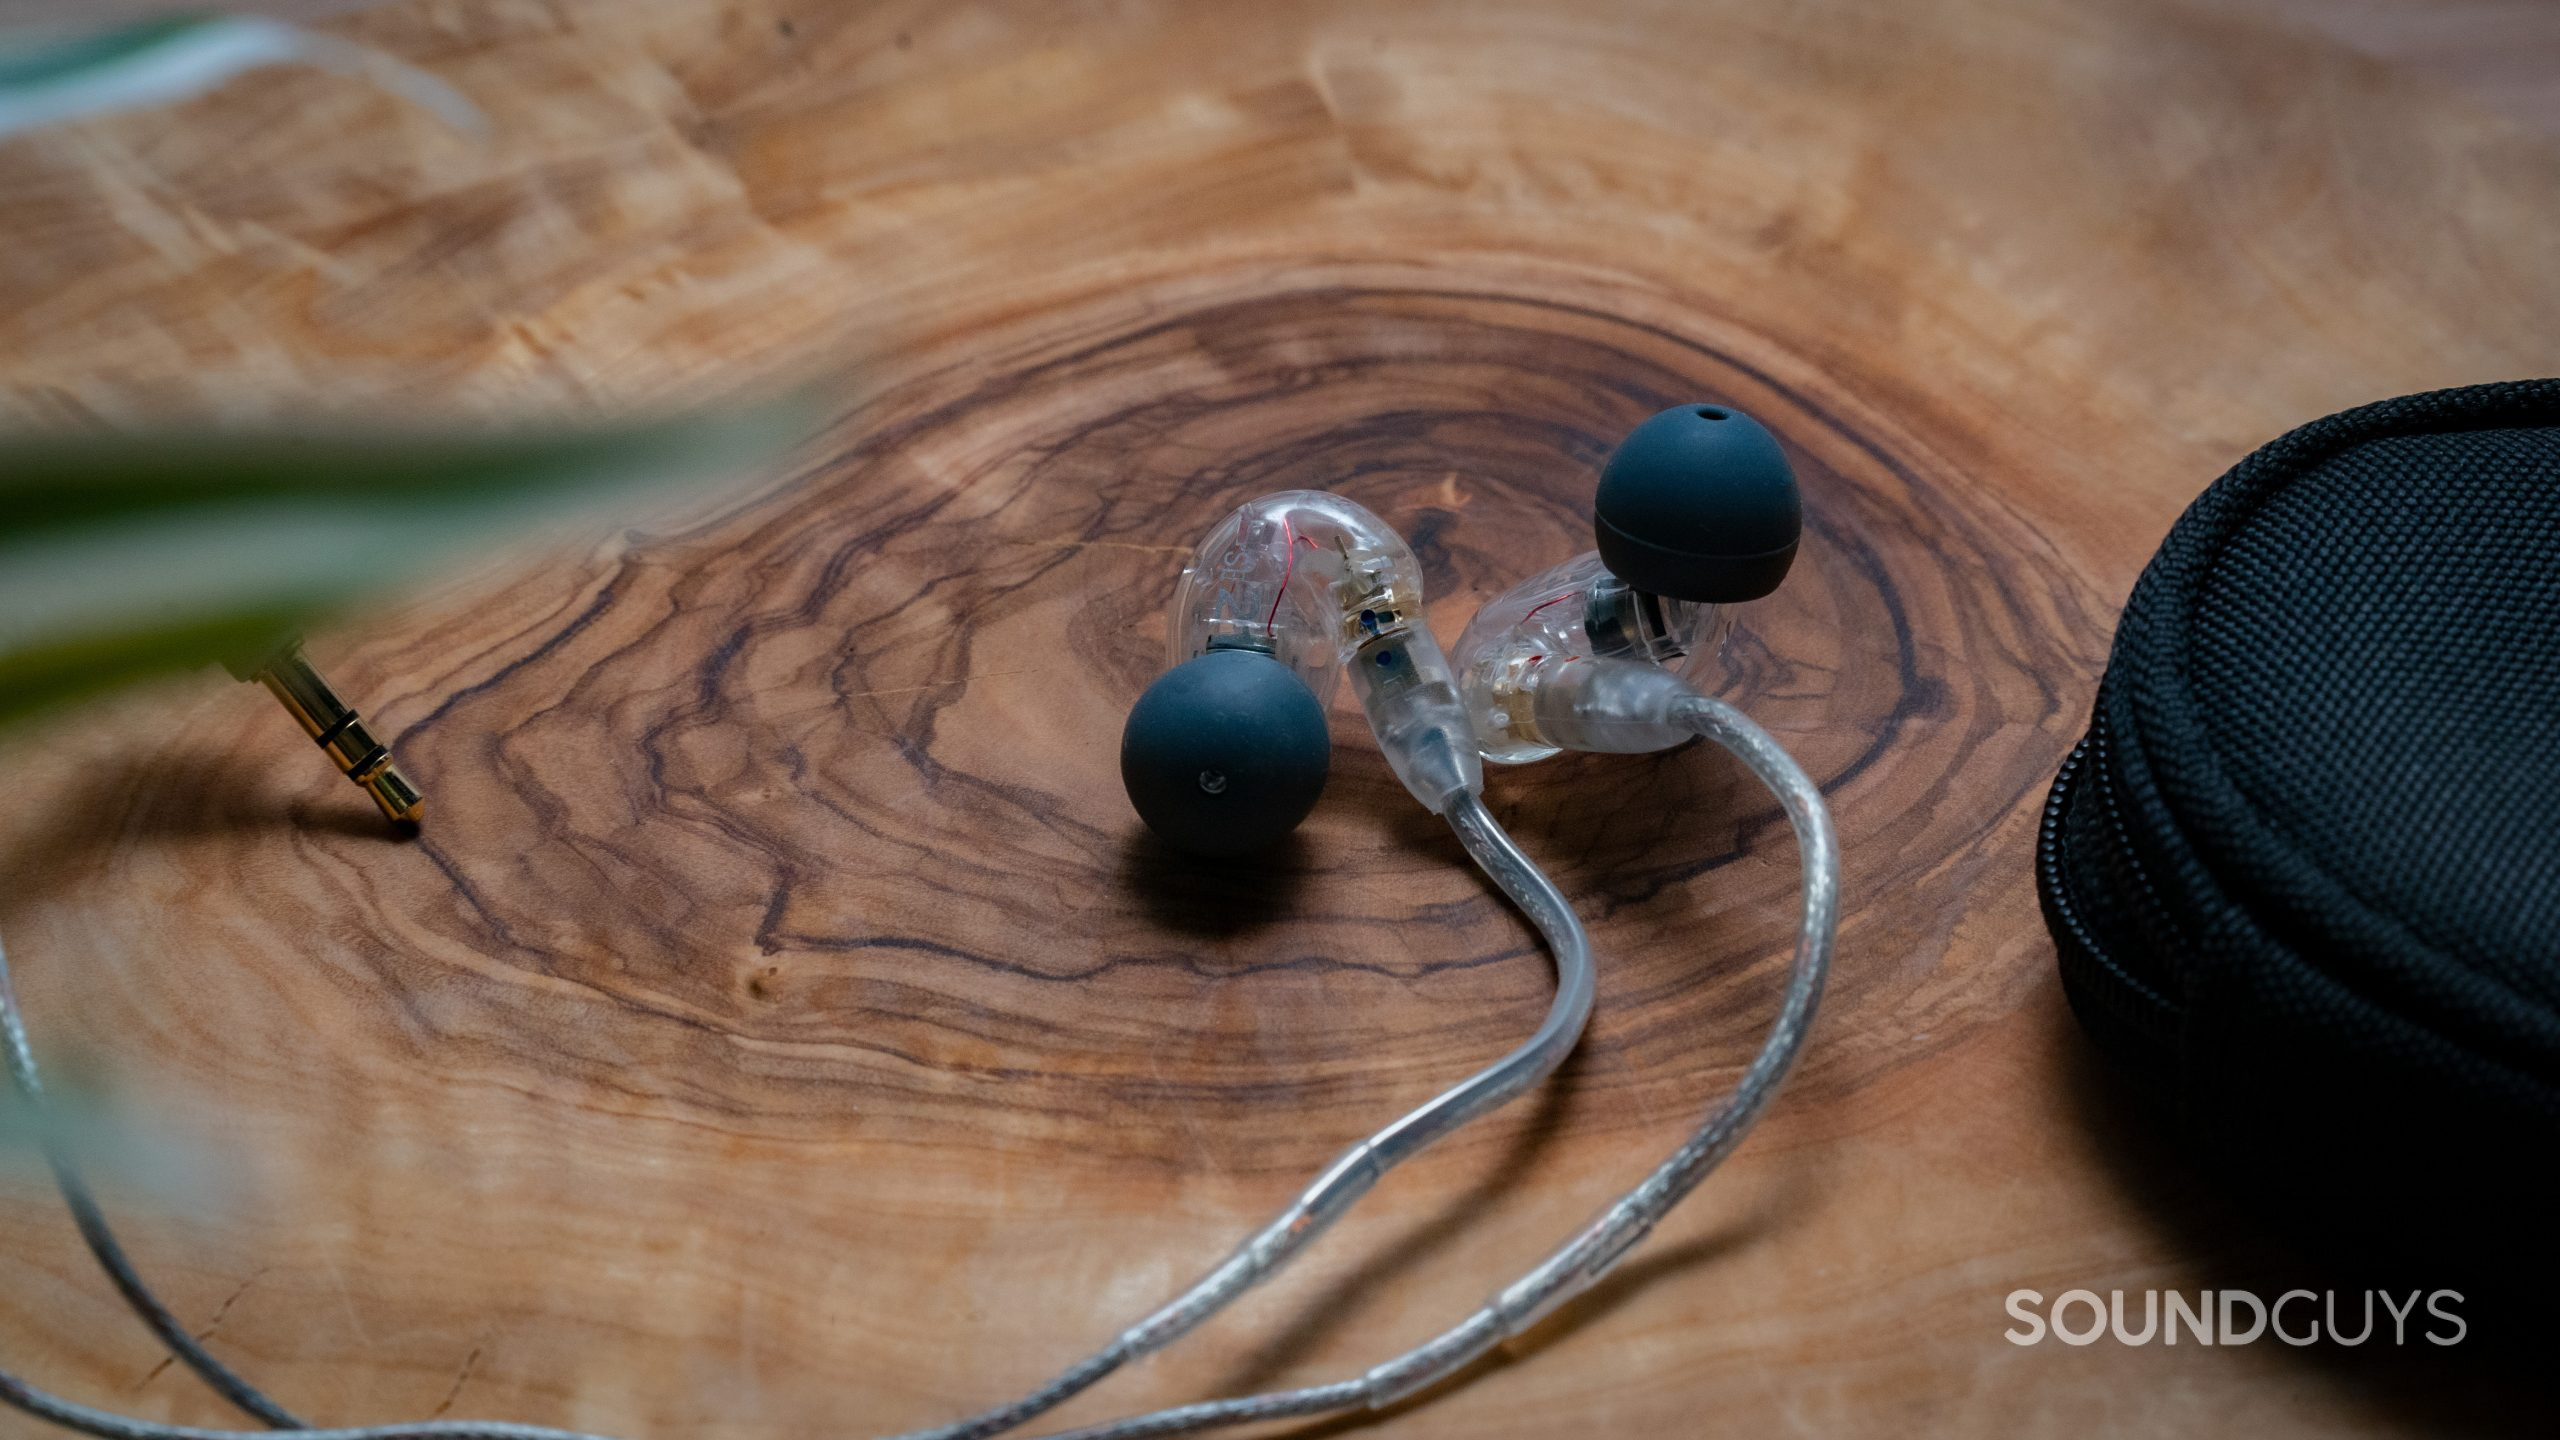 The Shure SE215 rests on a wood surface.